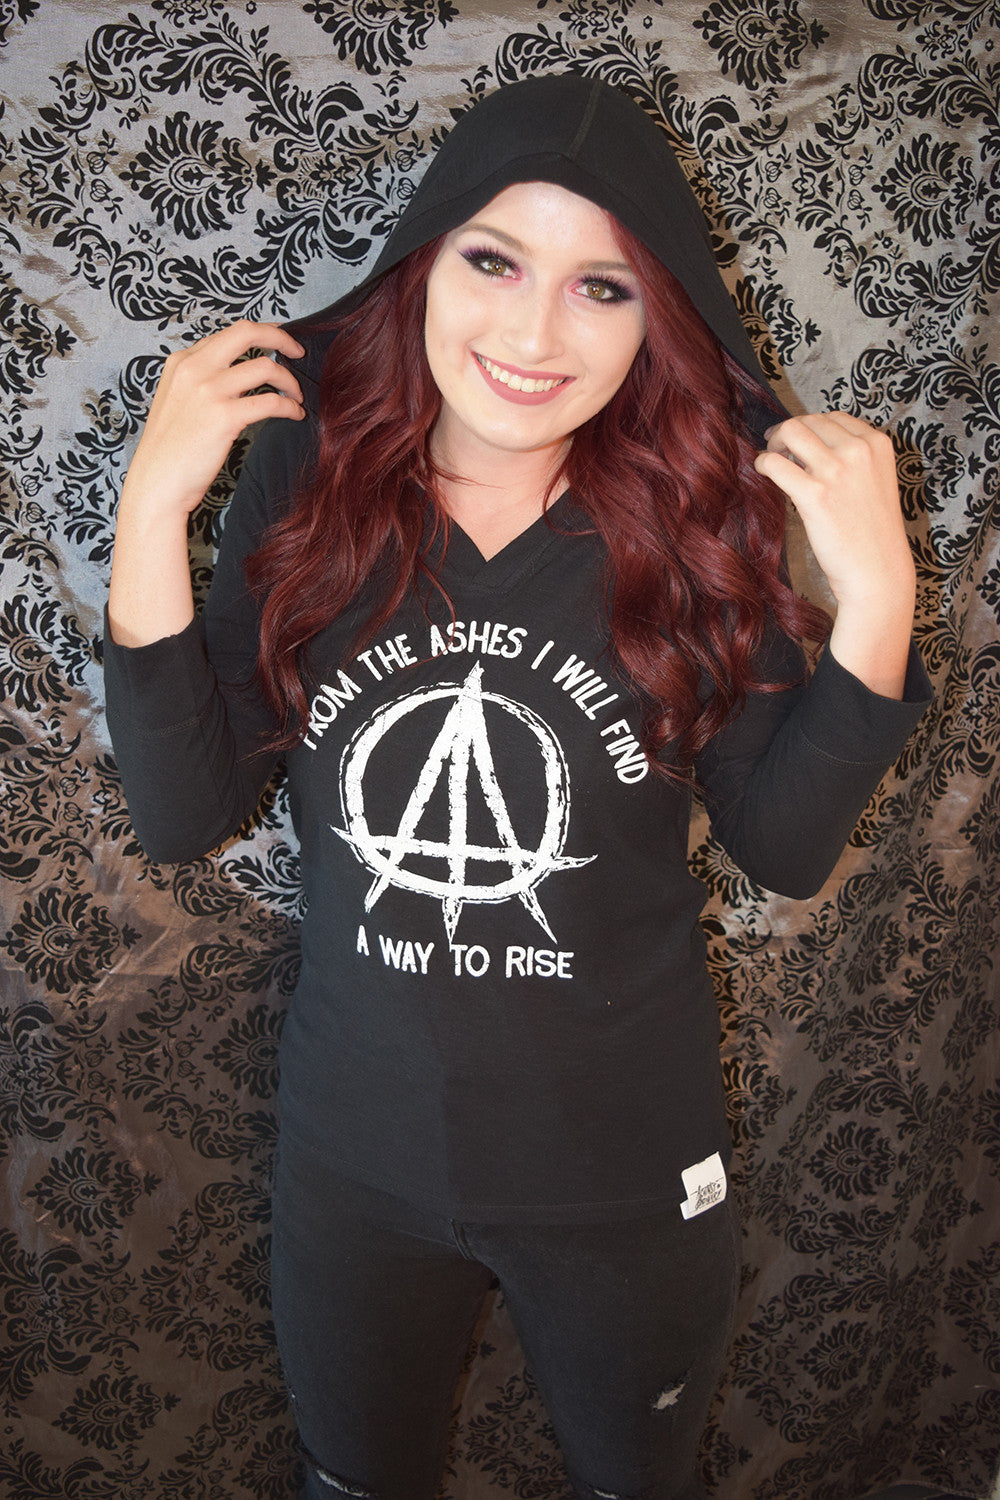 "FROM THE ASHES" Women's Hooded Tee